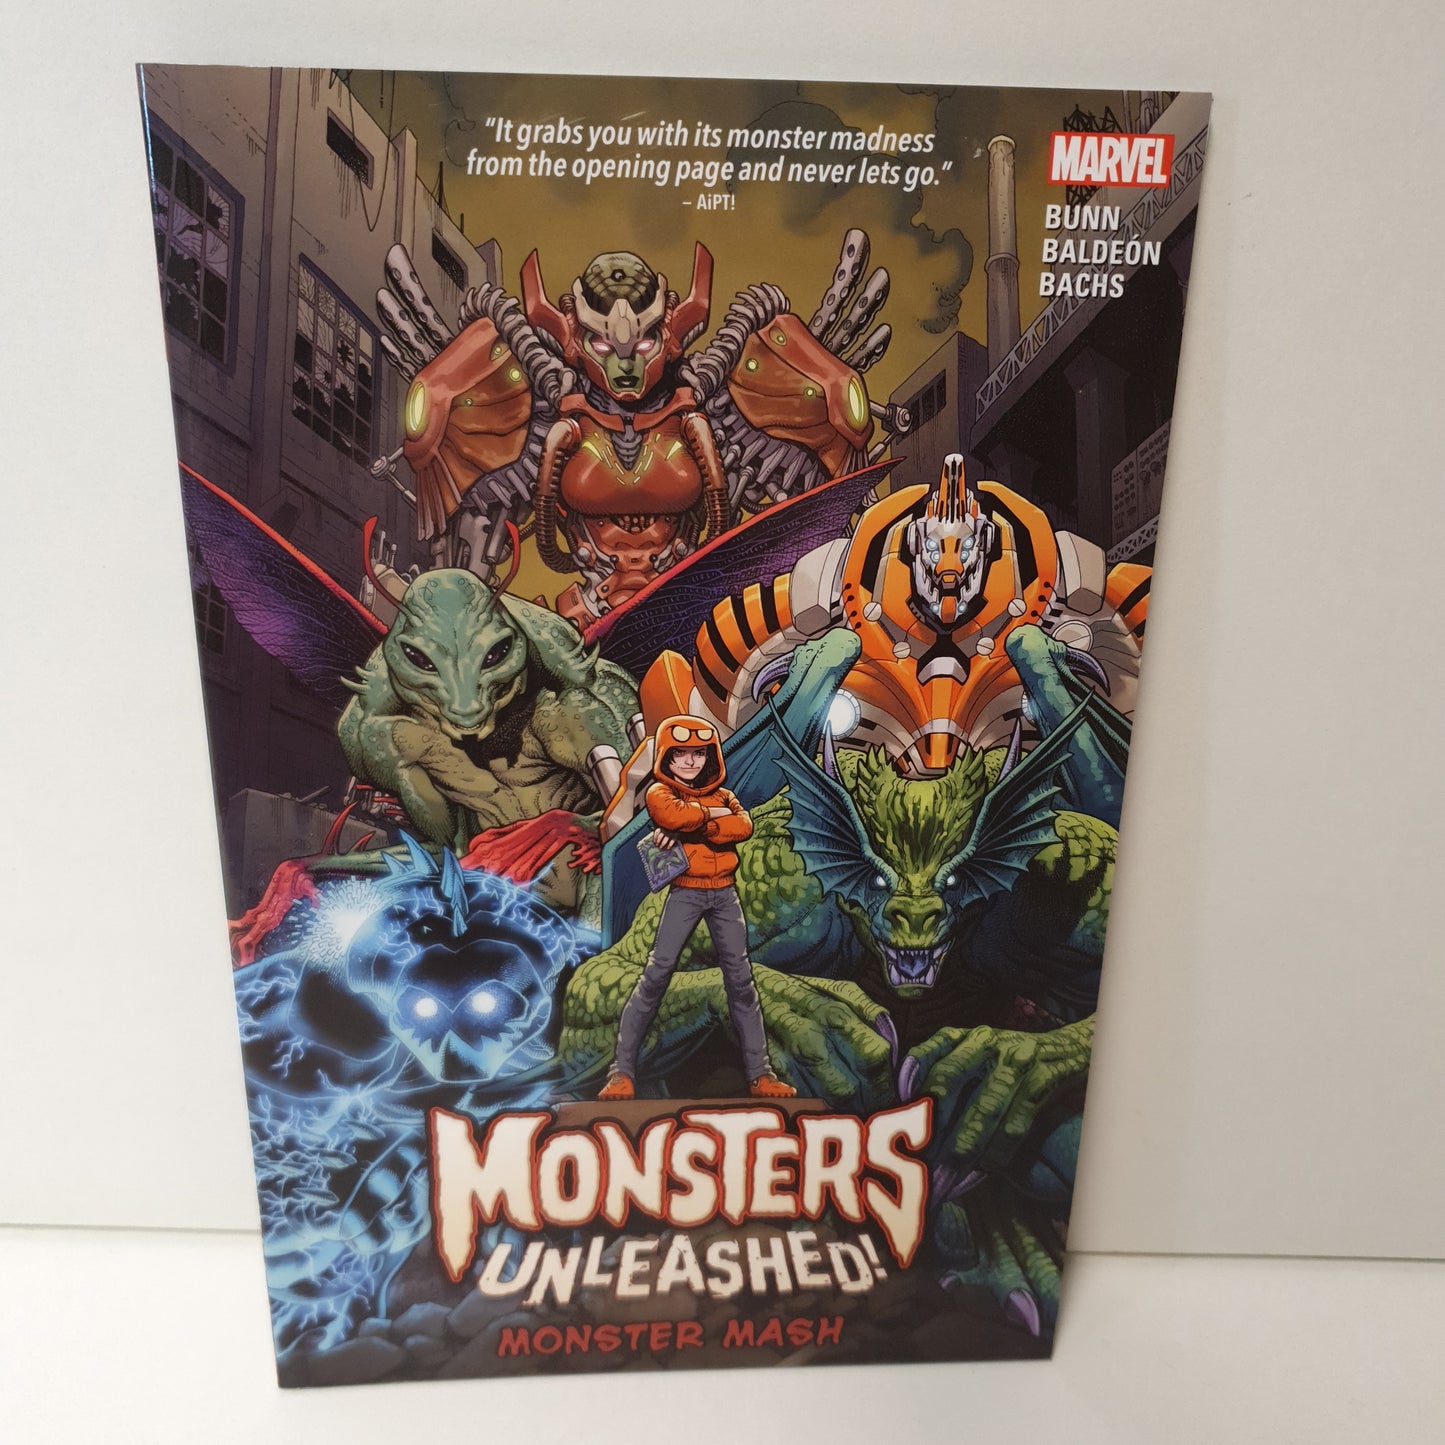 Monsters Unleashed! Monster Mash by Bunn, Baldeon & Bachs (2017)